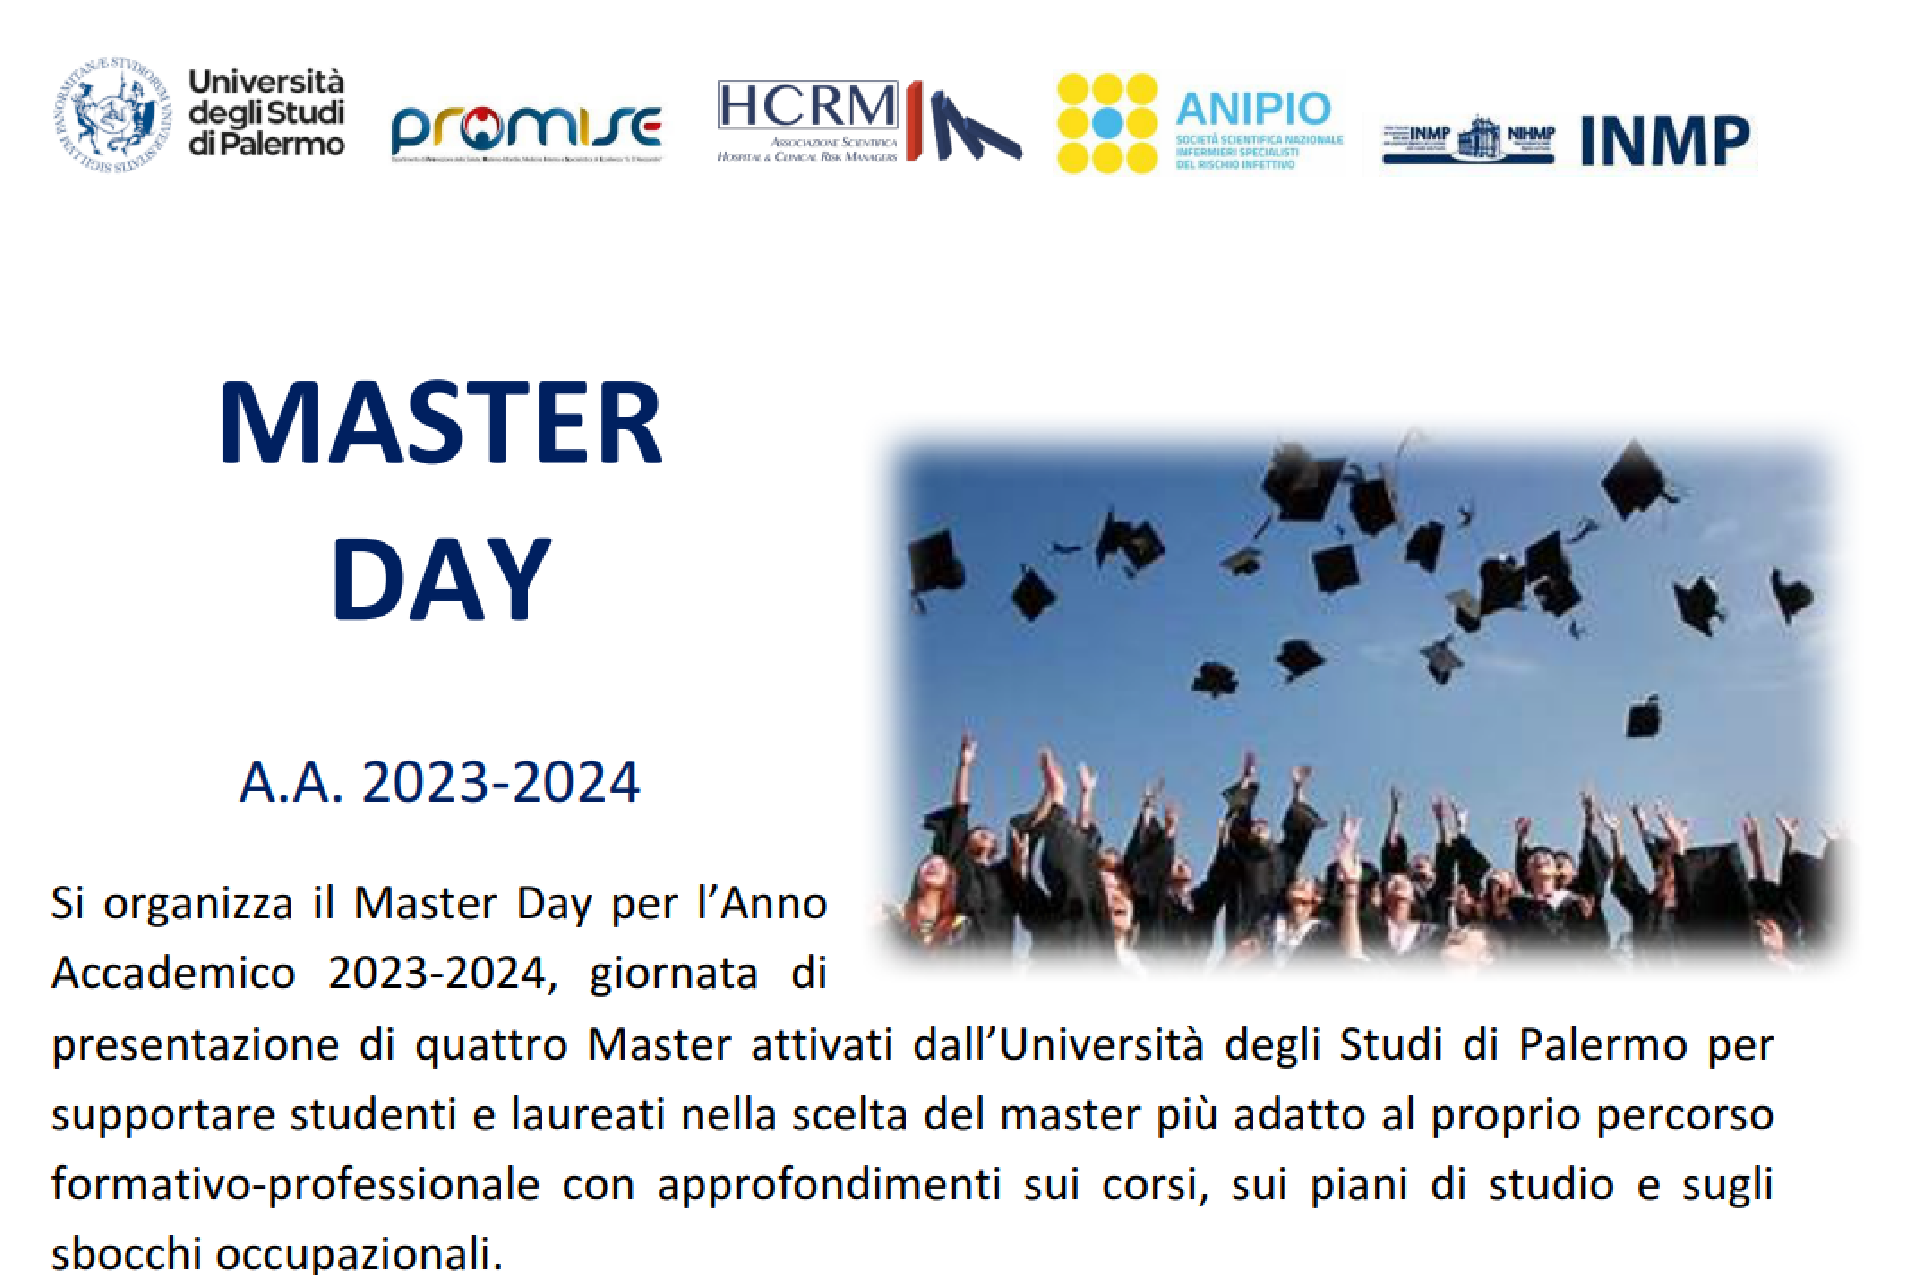 MASTER DAY A.A. 2023-2024 